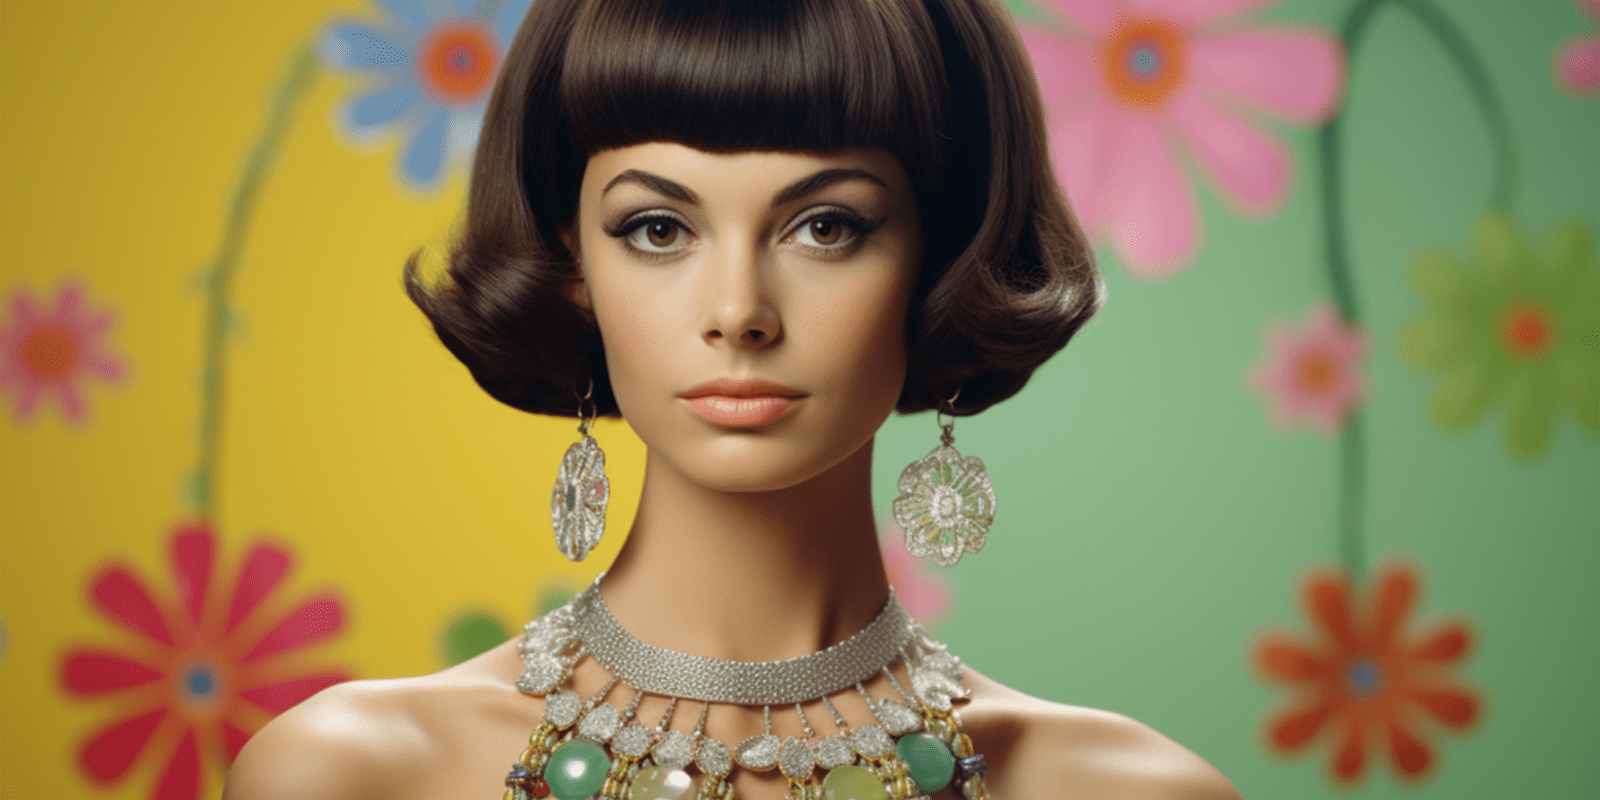 Feature image of 1960s woman with short brown hair wearing drop earrings with matching necklace in front of floral background